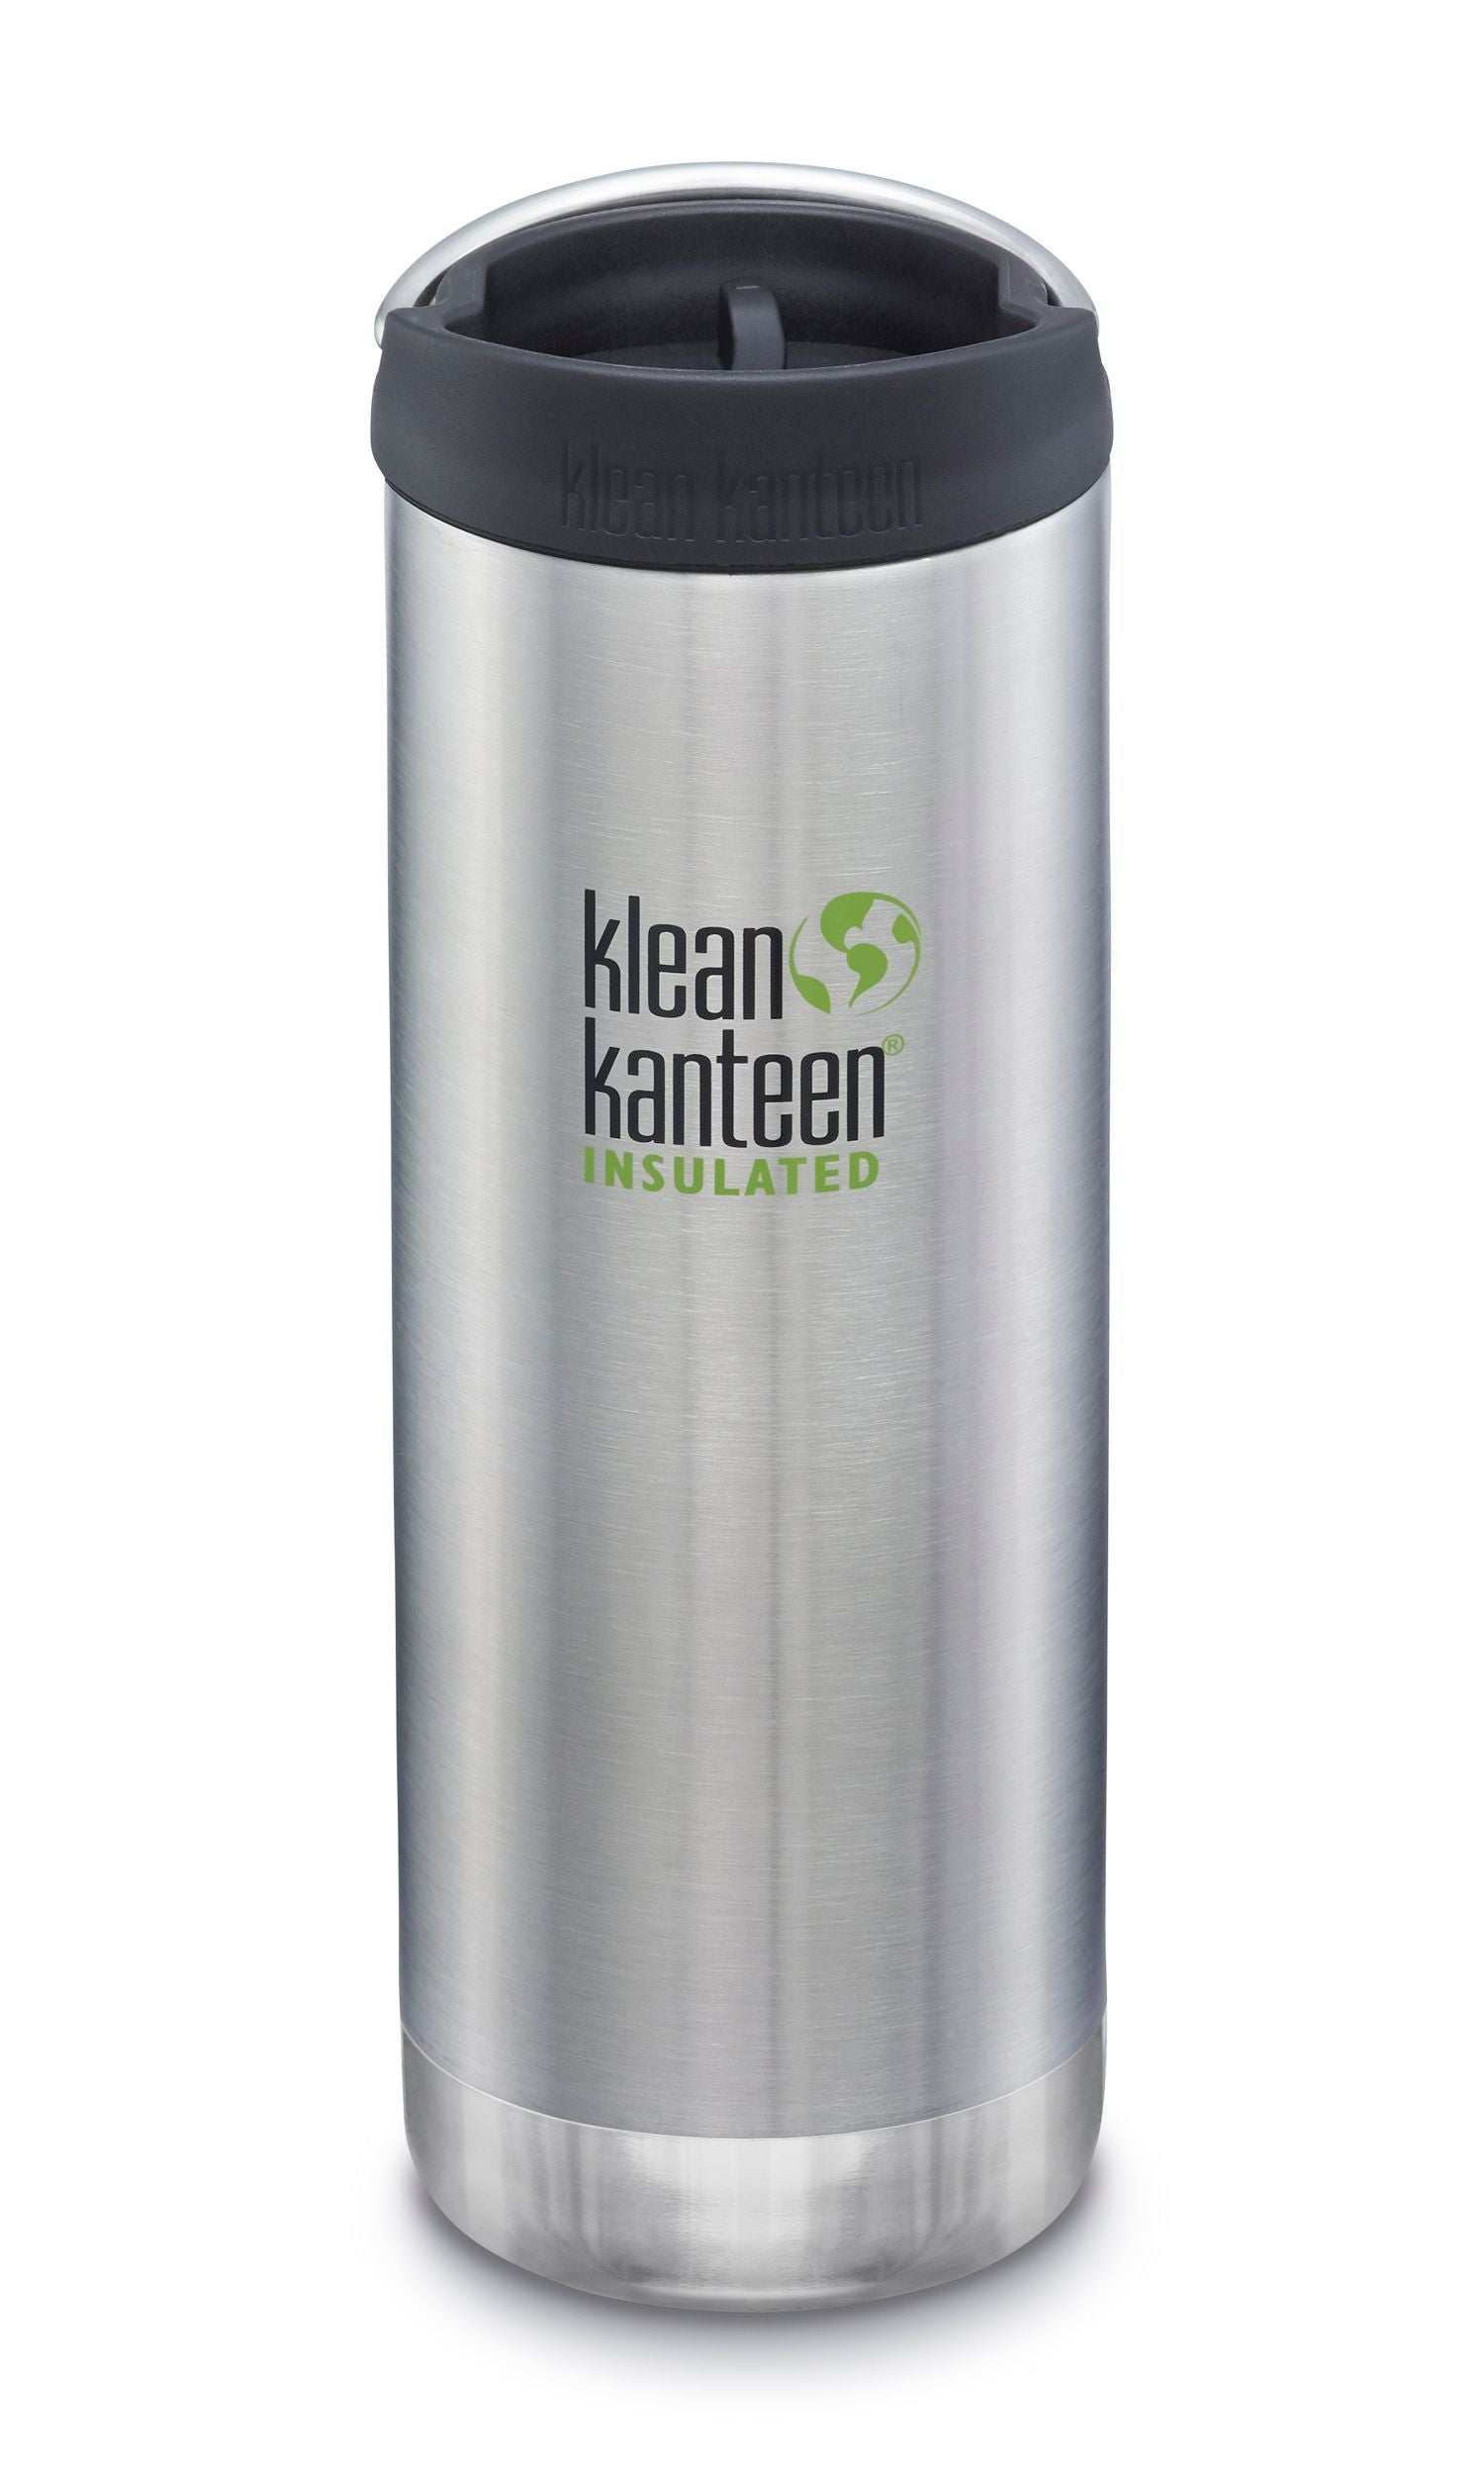 Matte pink insulated stainless steel bottle with a straight silhouette. "Klean Kanteen Insulated" logo printed on the bottle in white. Black pastic lid with a slide tab to open and close the drinking hole and a stainless handle.